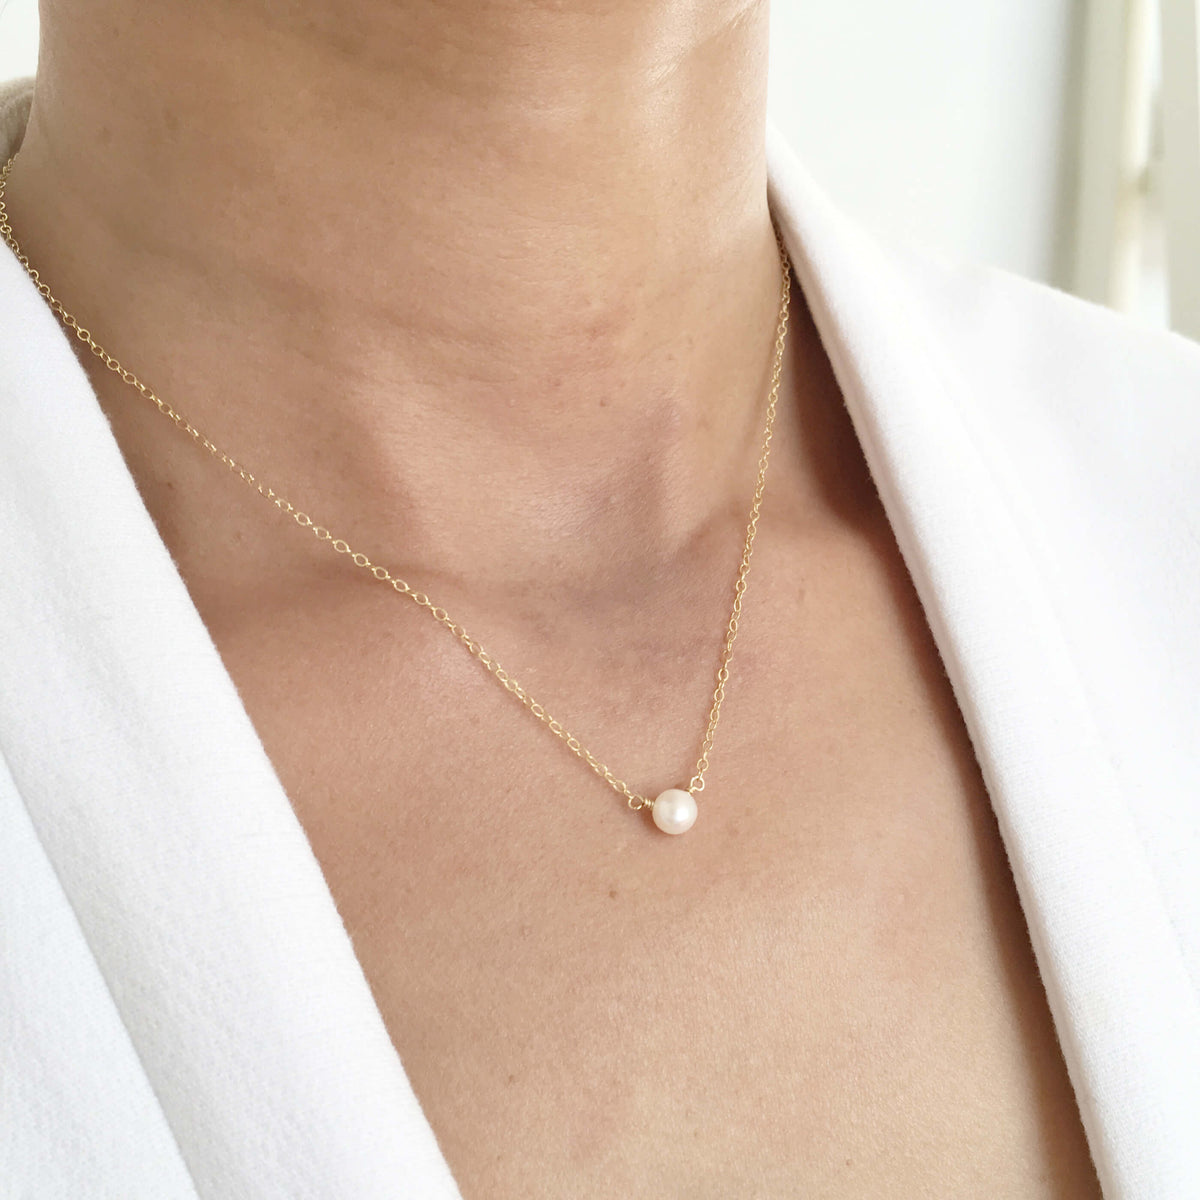 Simple Pearl Necklace in Solid 14K Gold with Large Genuine